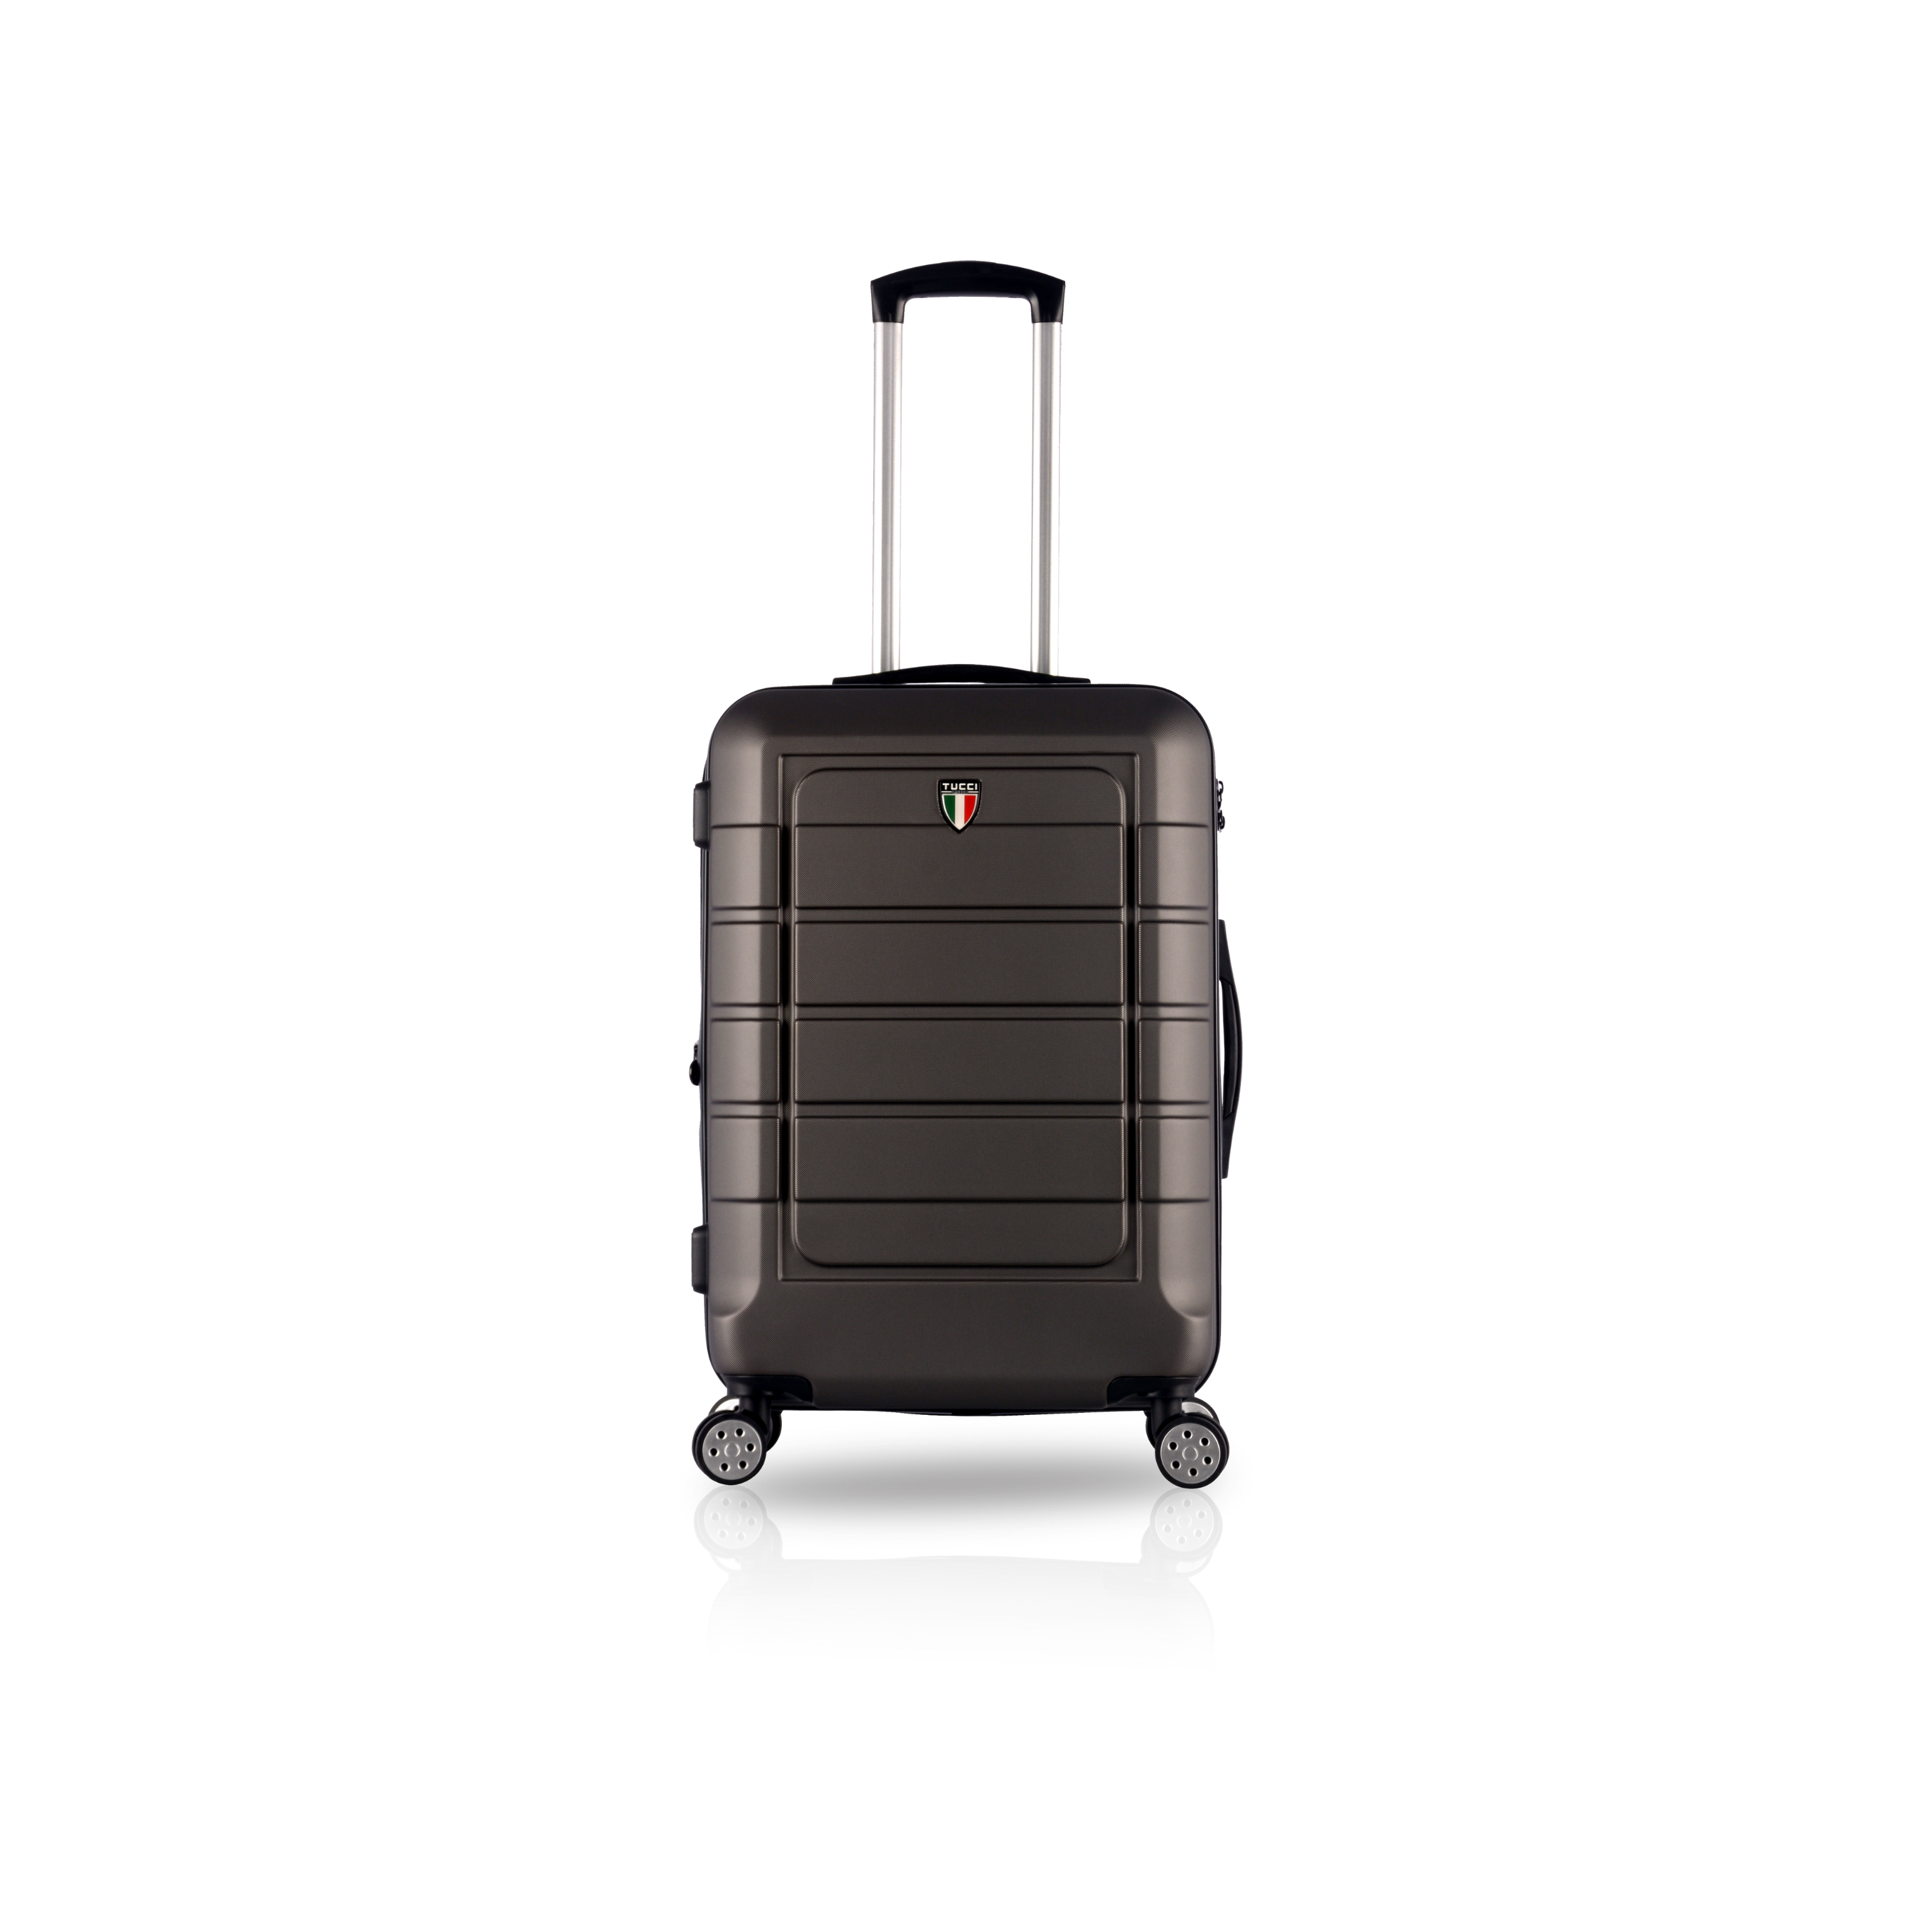 TUCCI CONSOLE ABS 20" Carry On Luggage